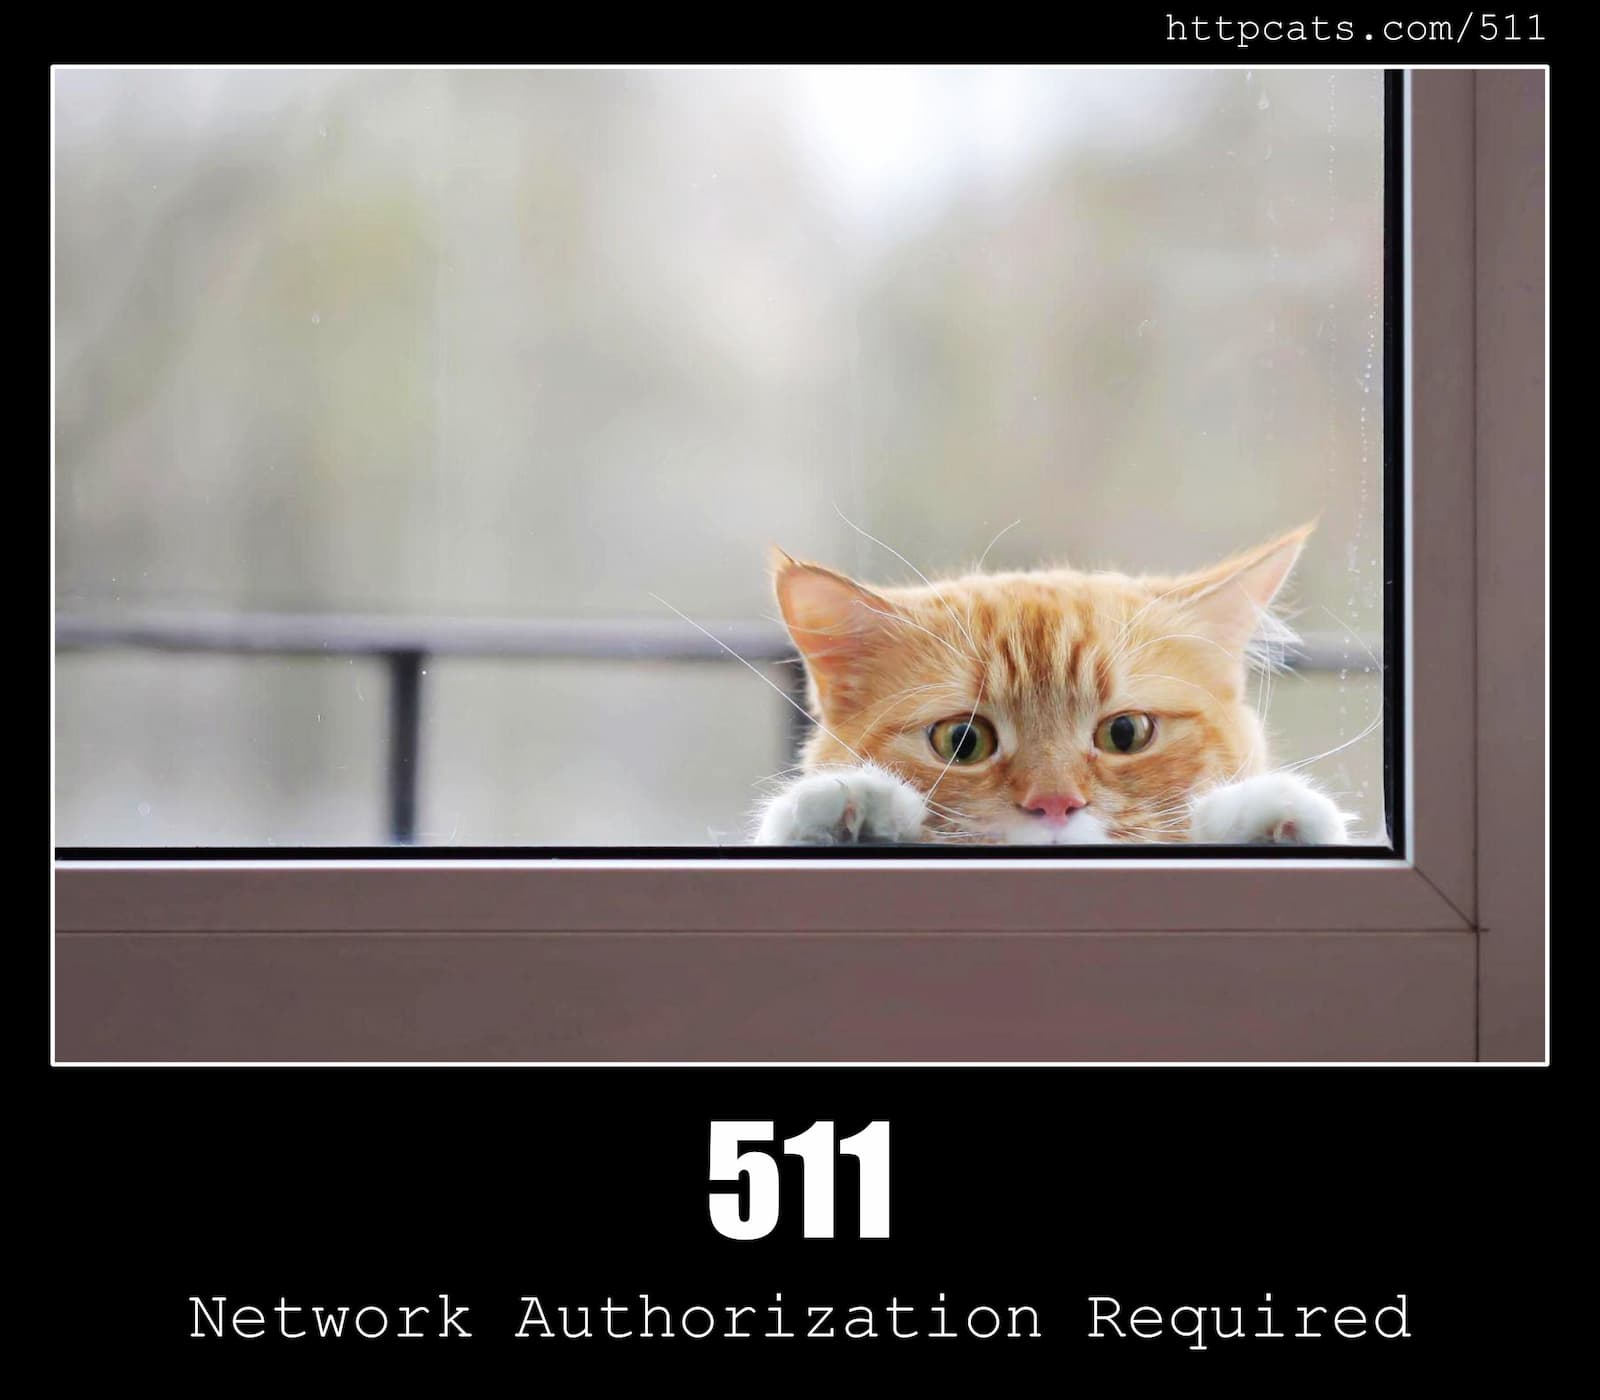 HTTP Status Code 511 Network Authentication Required & Cats